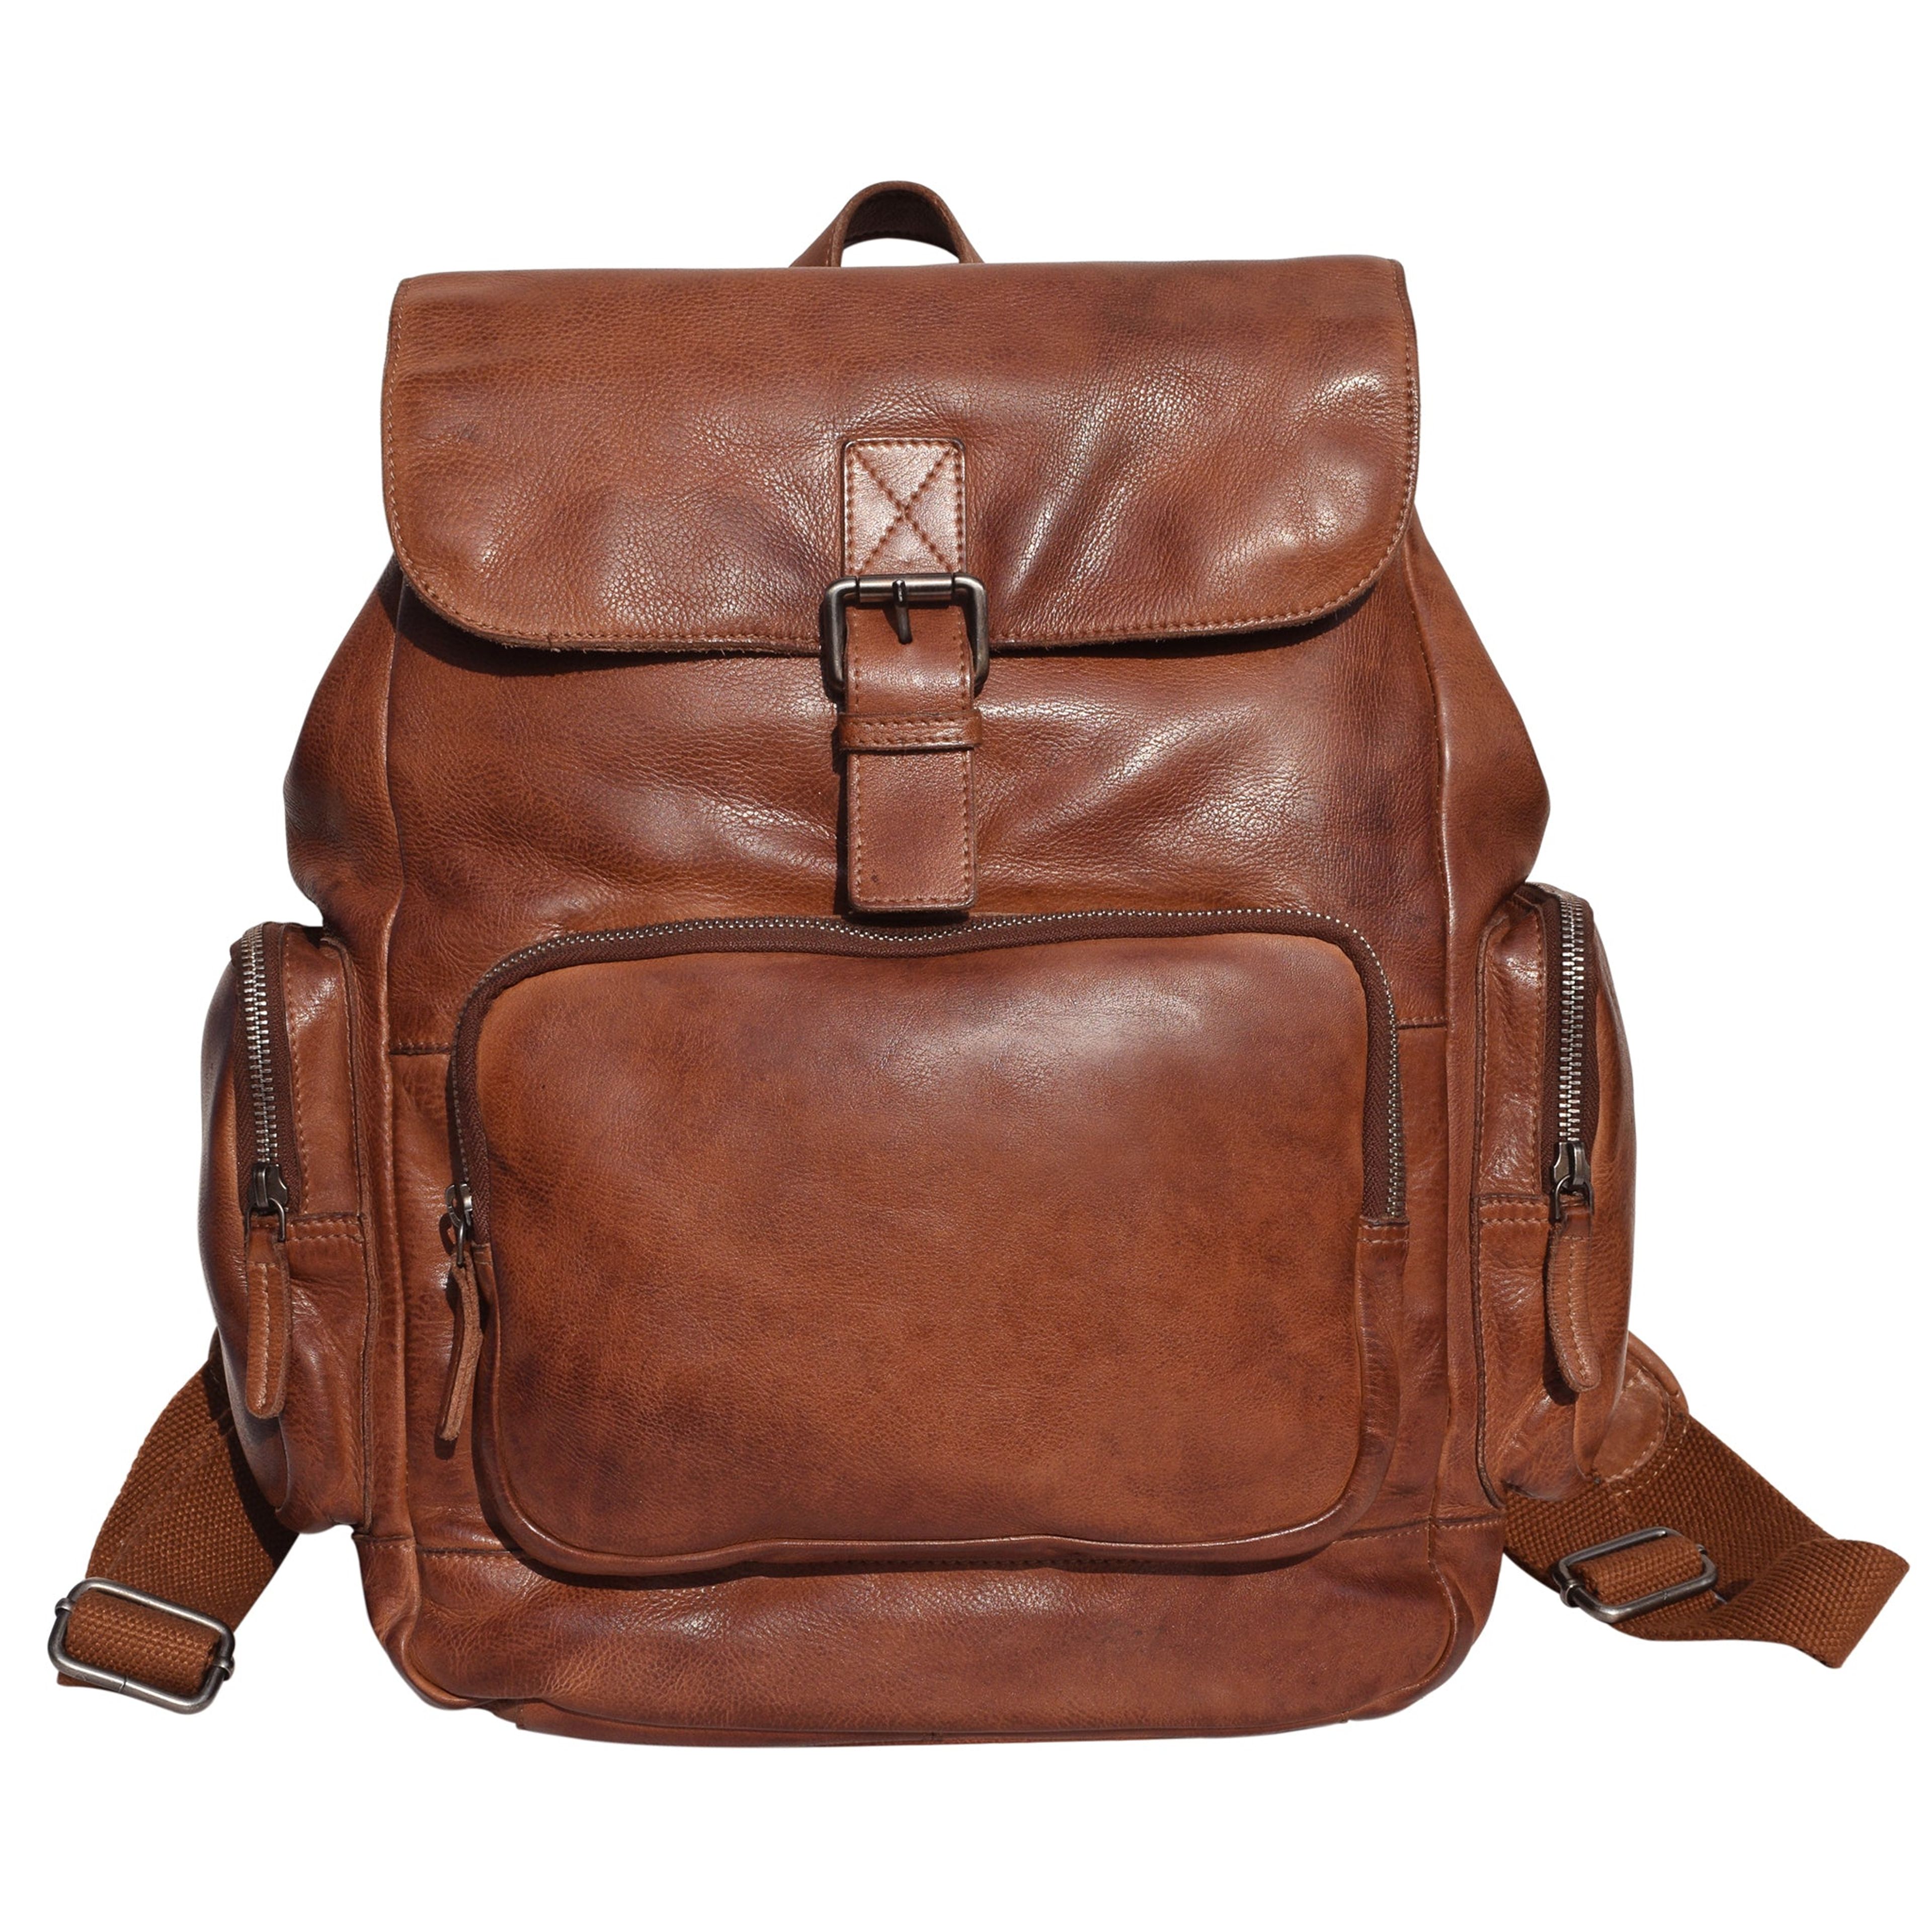 www.laticoleathers.com%2Fproducts%2Fmateo backpack%2F1704835865%2F1507 VTRCOG Front